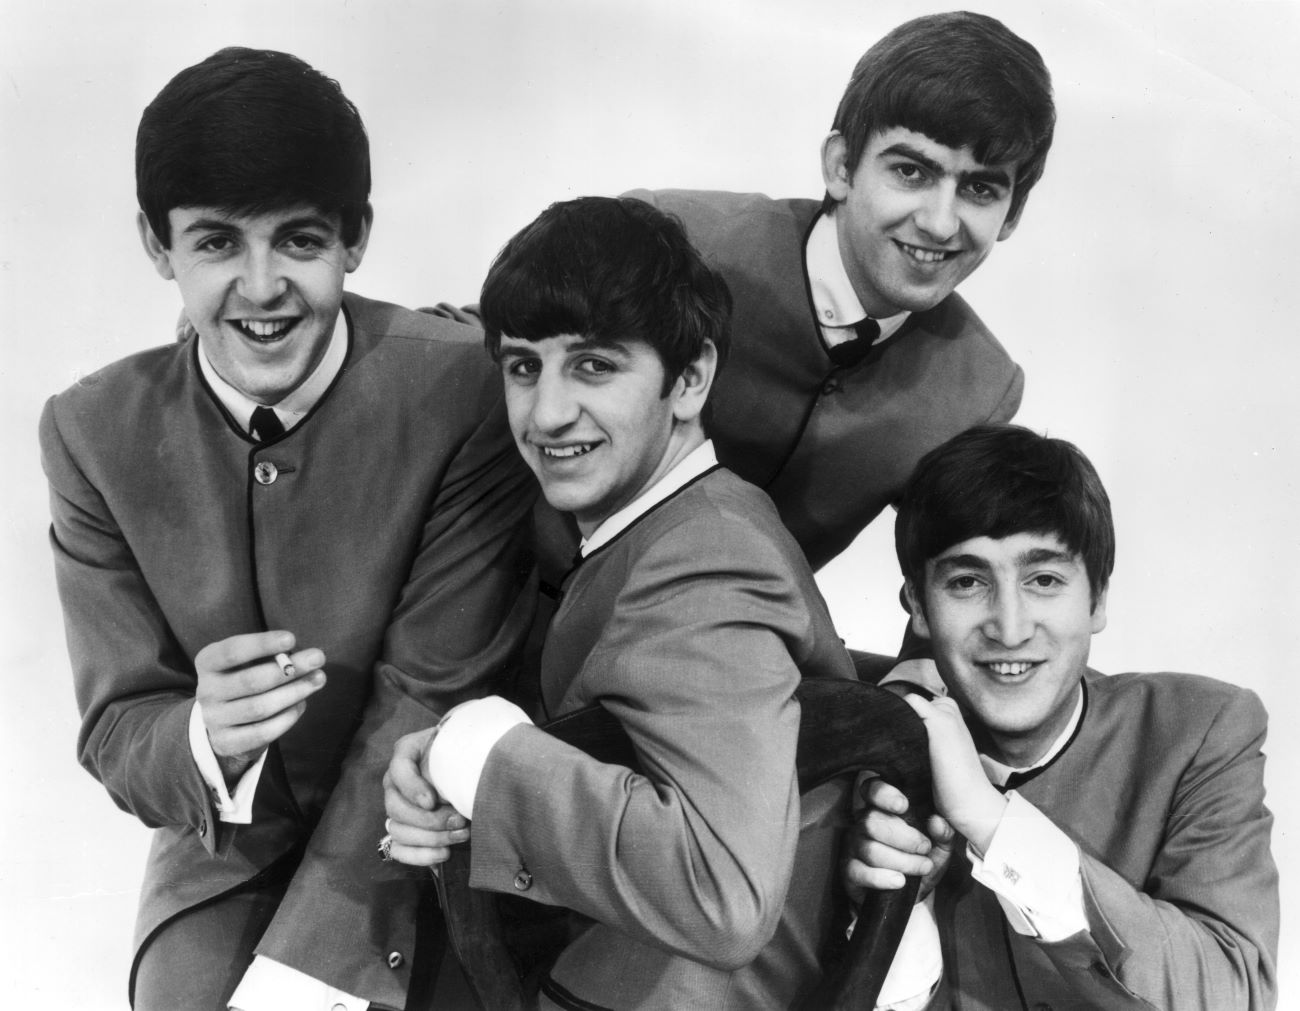 A black and white photo of Paul McCartney, Ringo Starr, George Harrison, and John Lennon of The Beatles wearing matching outfits. 